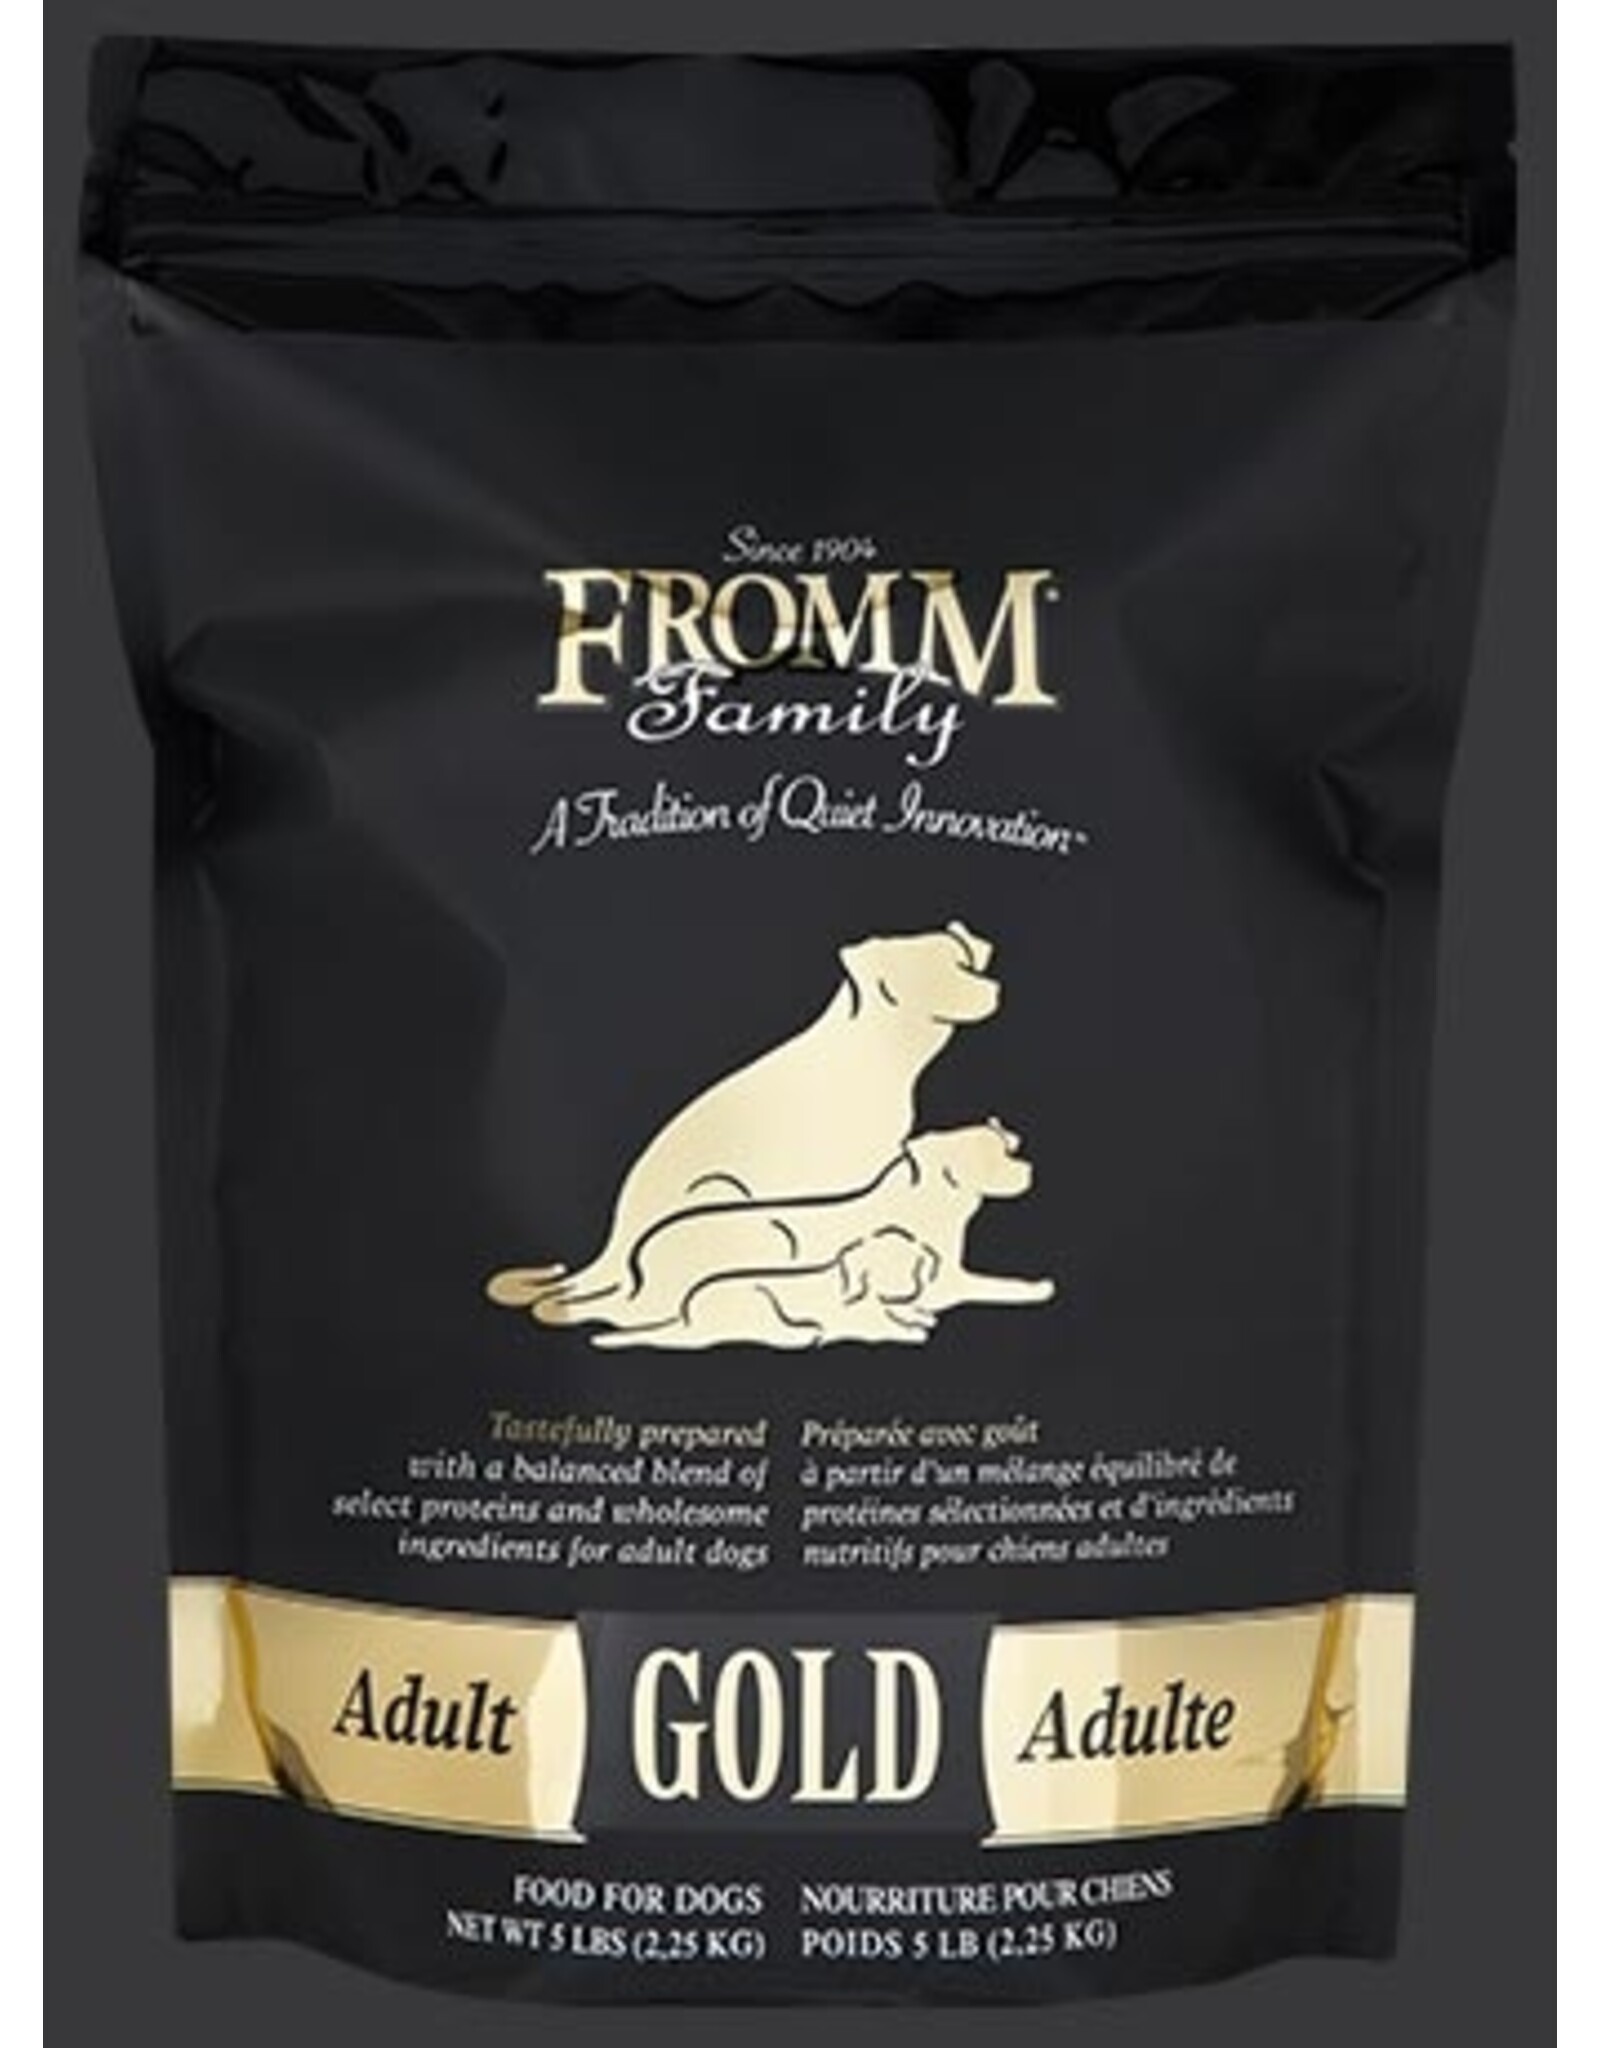 Fromm Gold Adult 5ib